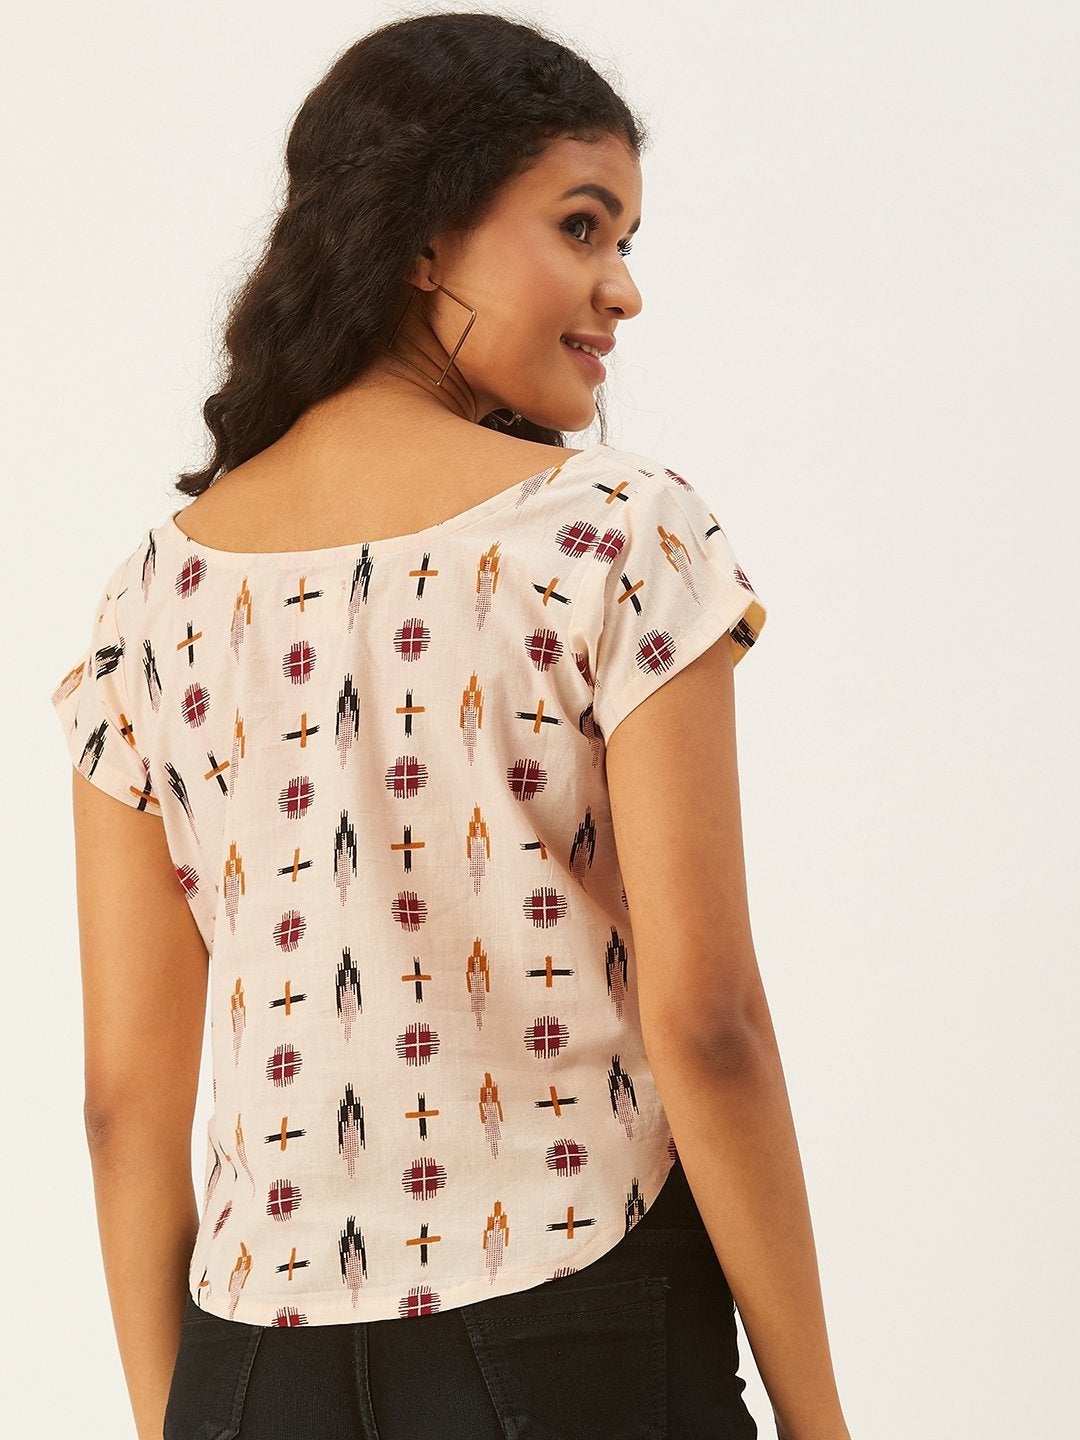 Women's Cream Top With Shapes - InWeave